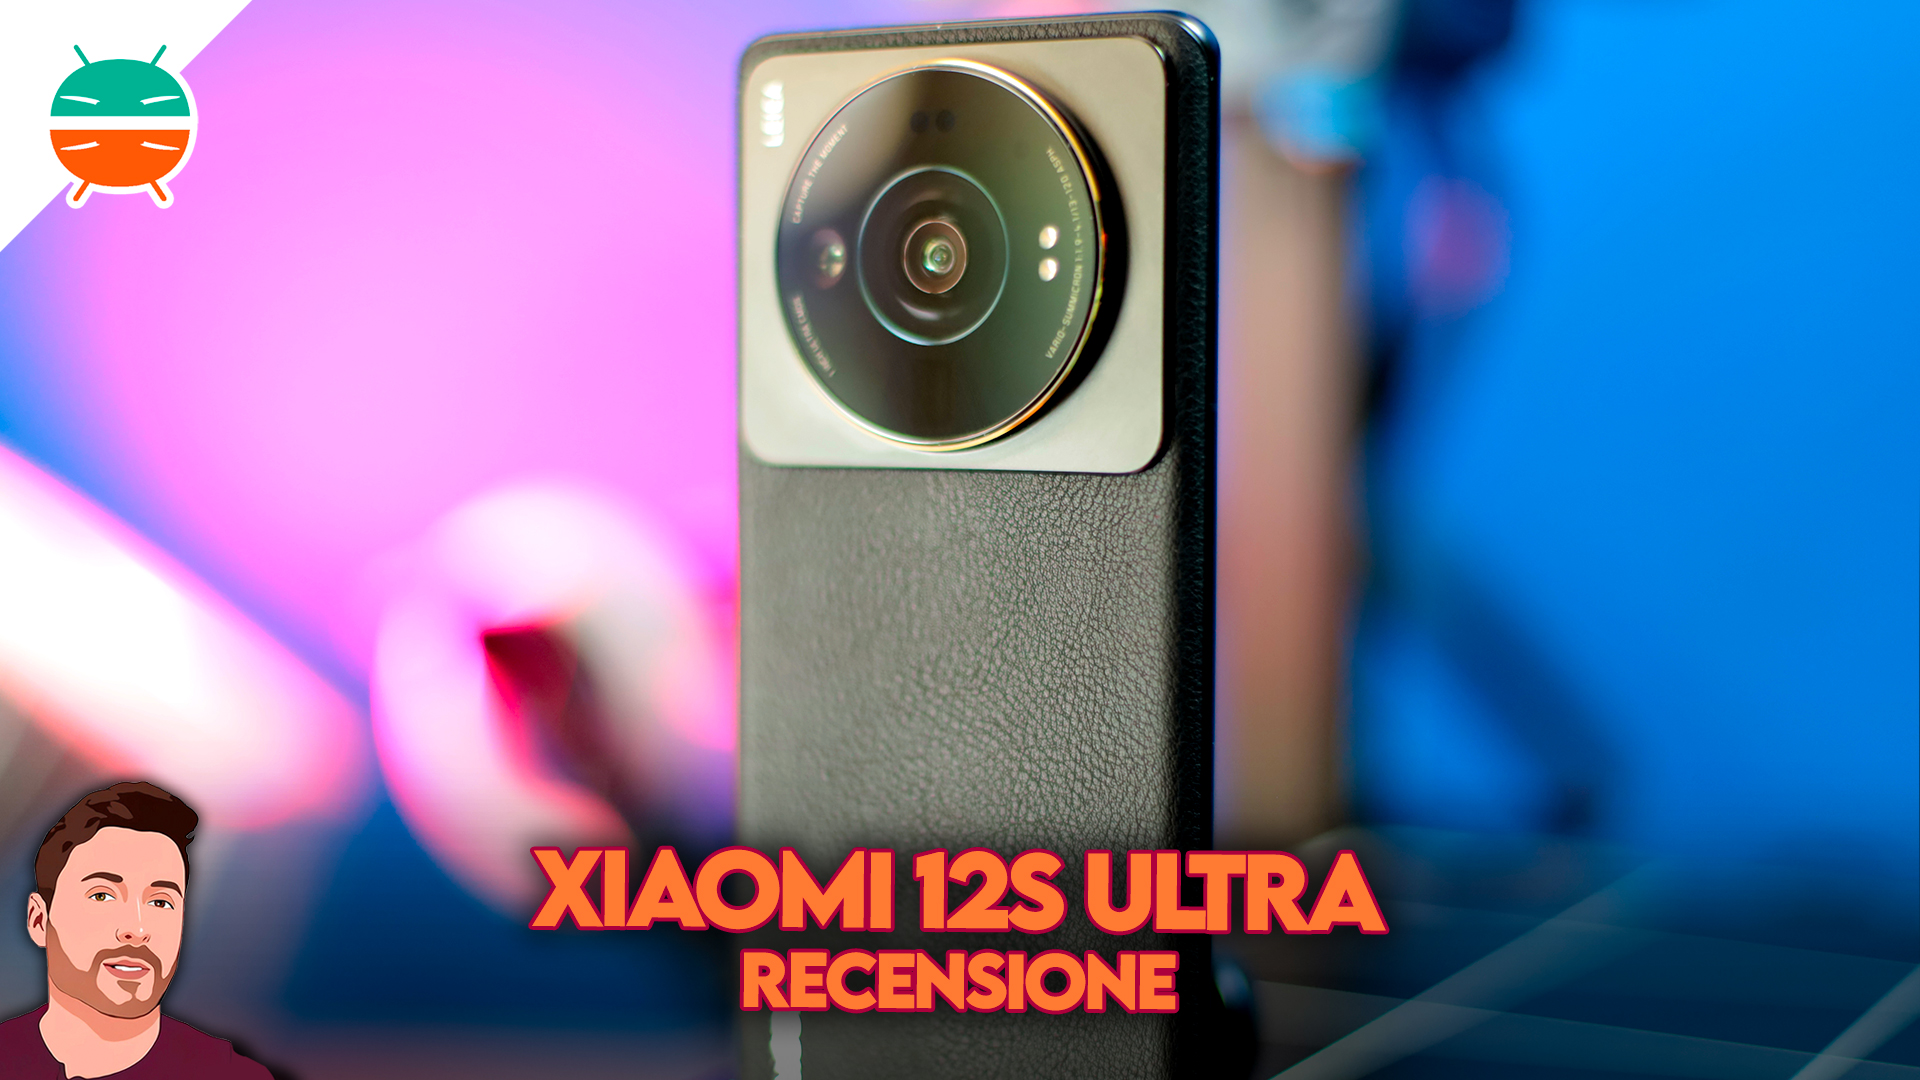 staking Vooravond domein Xiaomi 12S Ultra review: better than S22 Ultra? AWESOME camera - GizChina.it